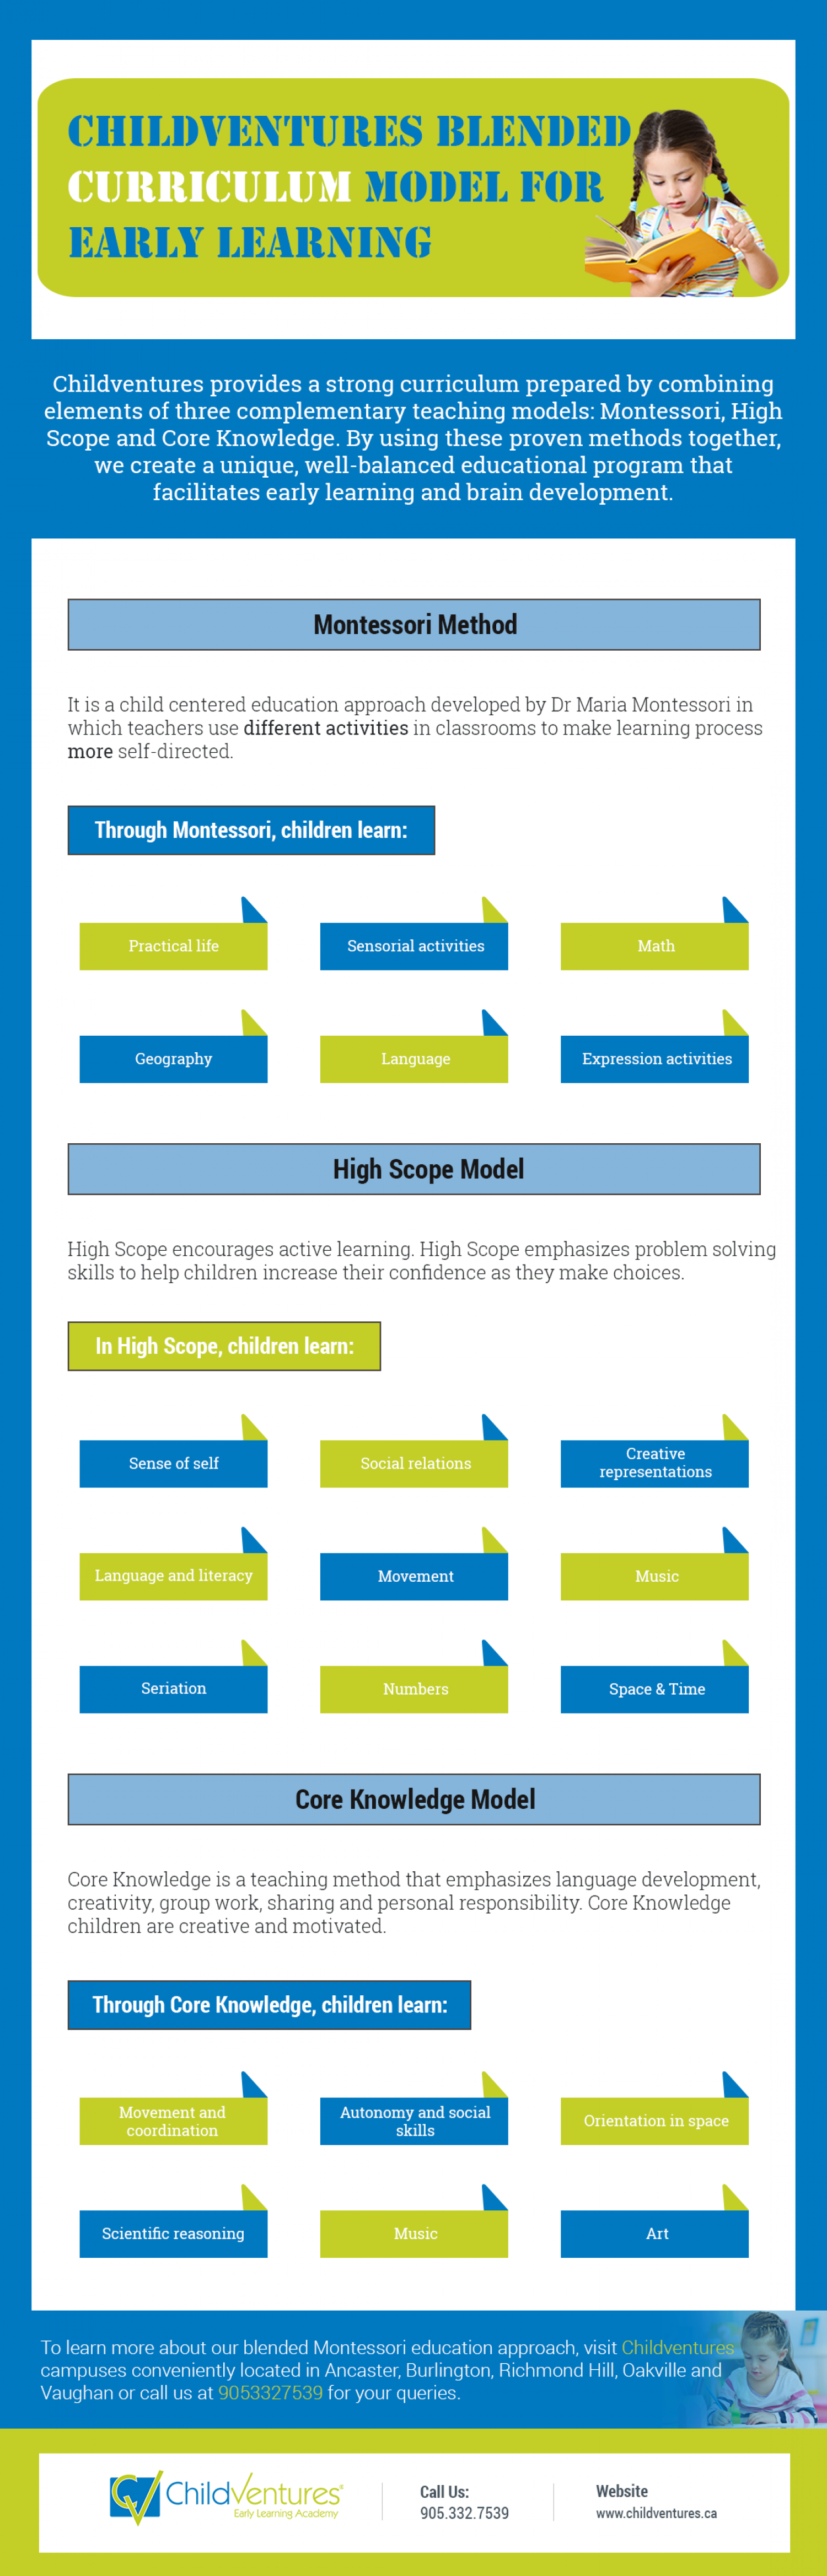 Blended Curriculum Model By Childventures For Early Learning Infographic